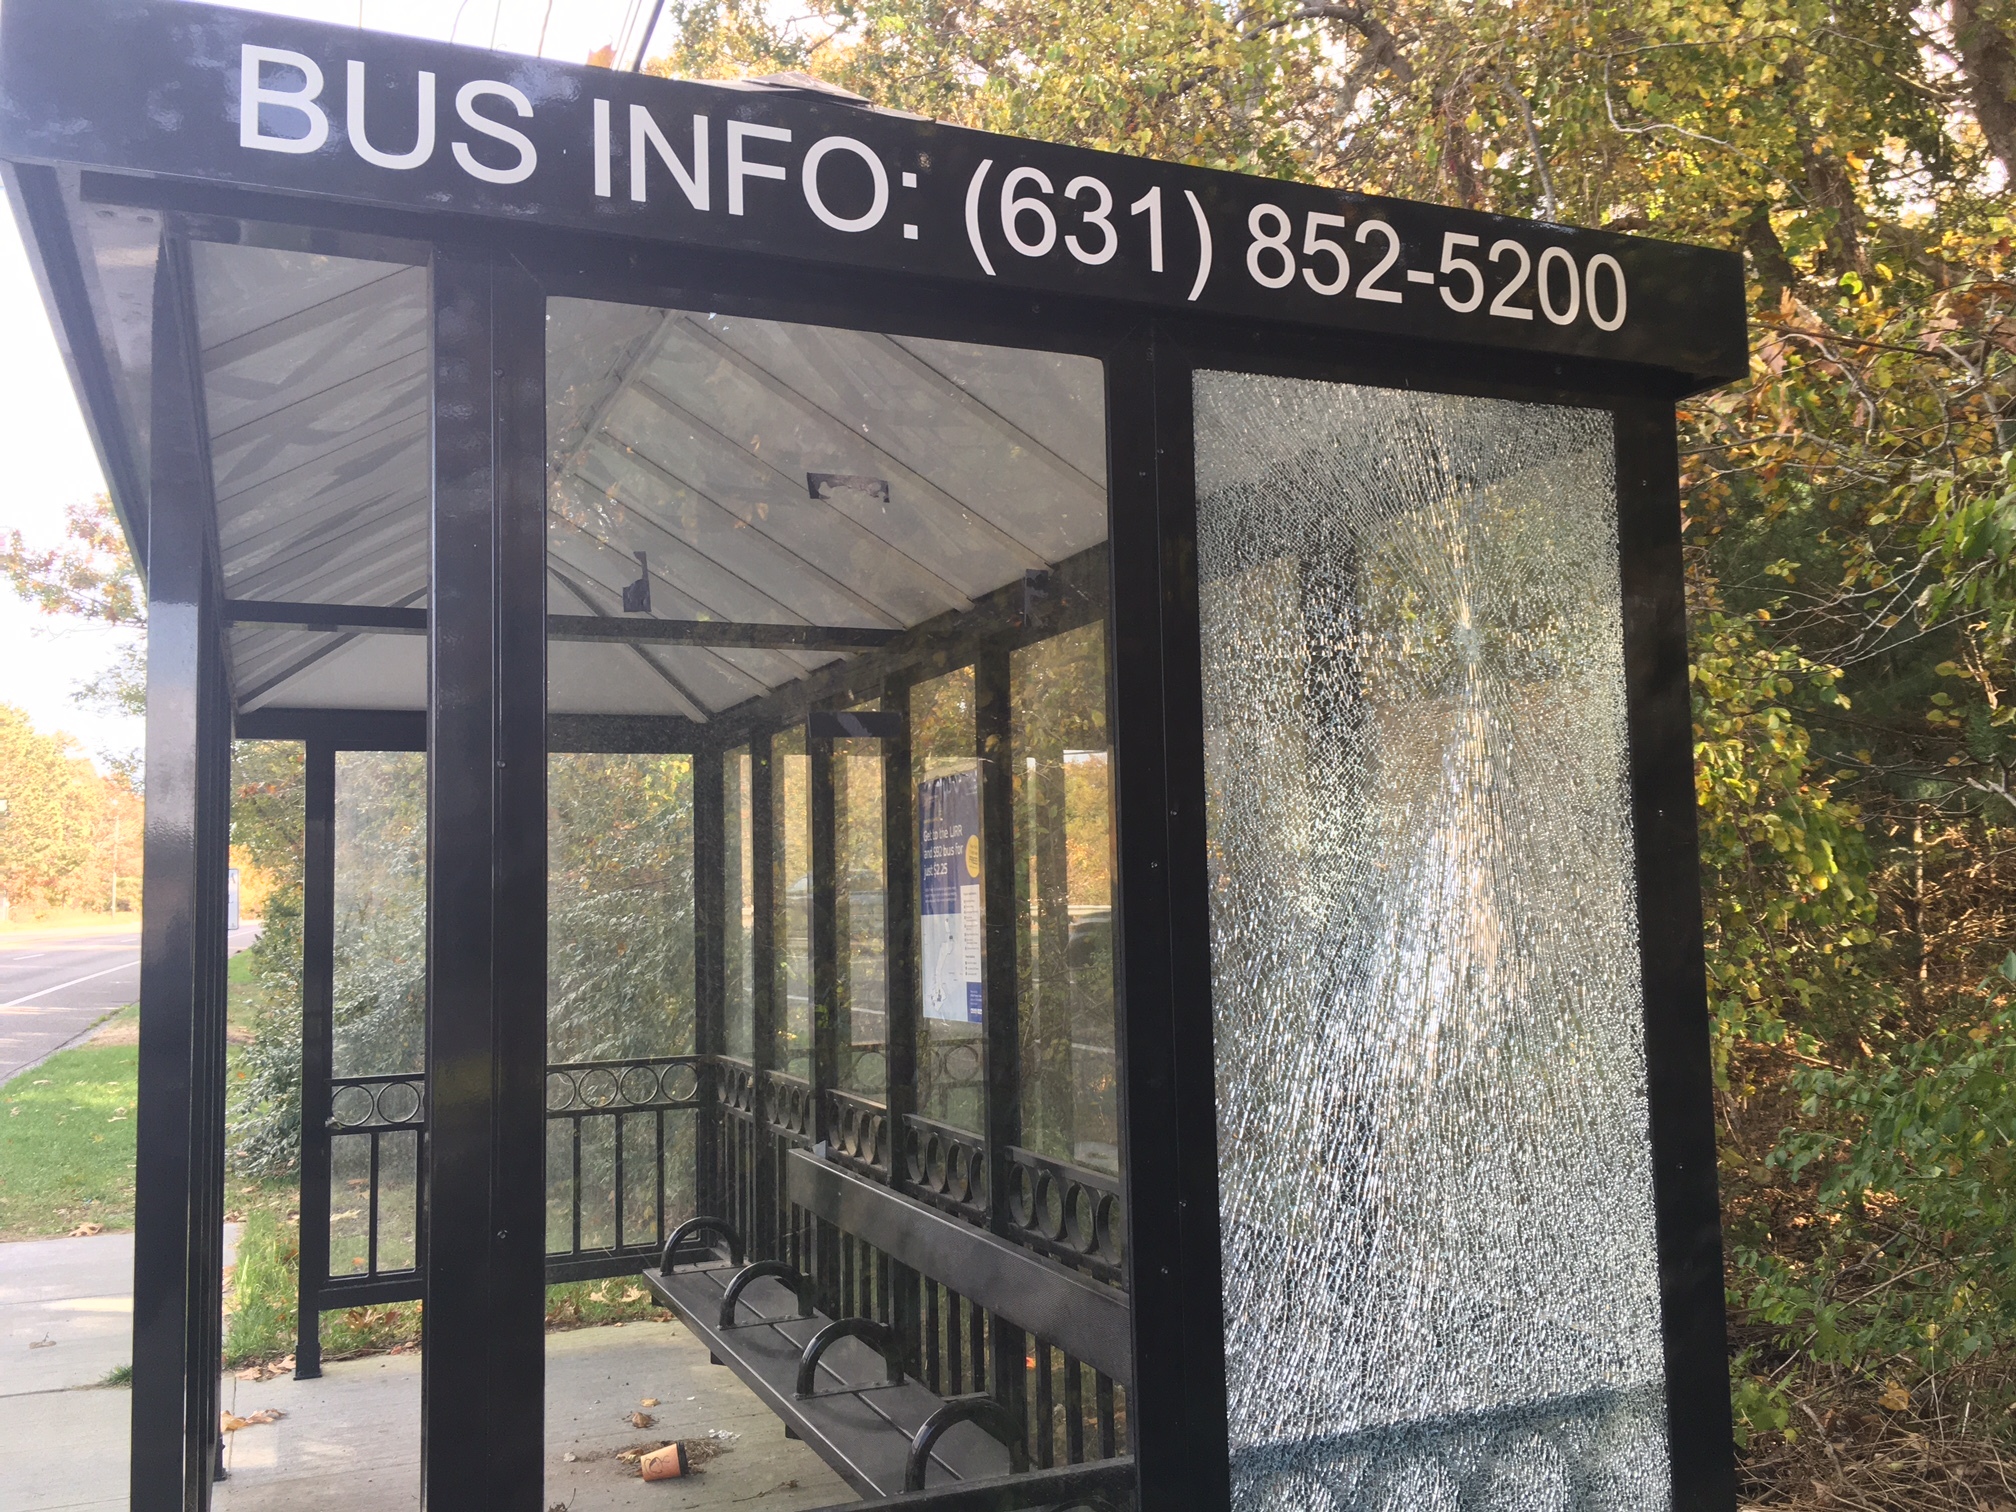 On the eastbound side of County Road 39,  the bus shelter  near the divided highway has been vandalized .